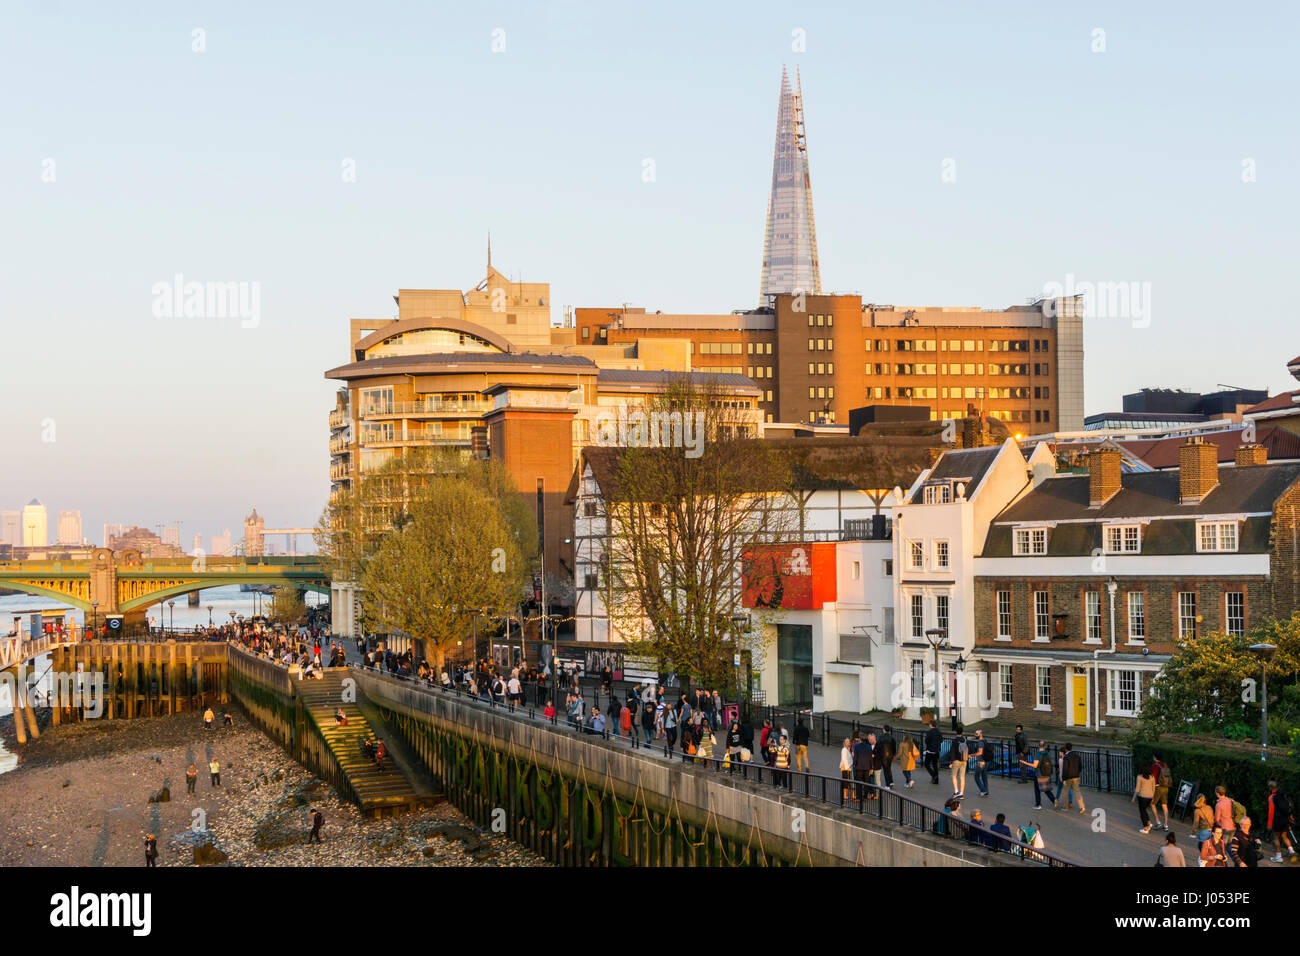 People enjoying a sunny evening on London's South Bank in front of the Globe Theatre with the Shard in the background. Stock Photo